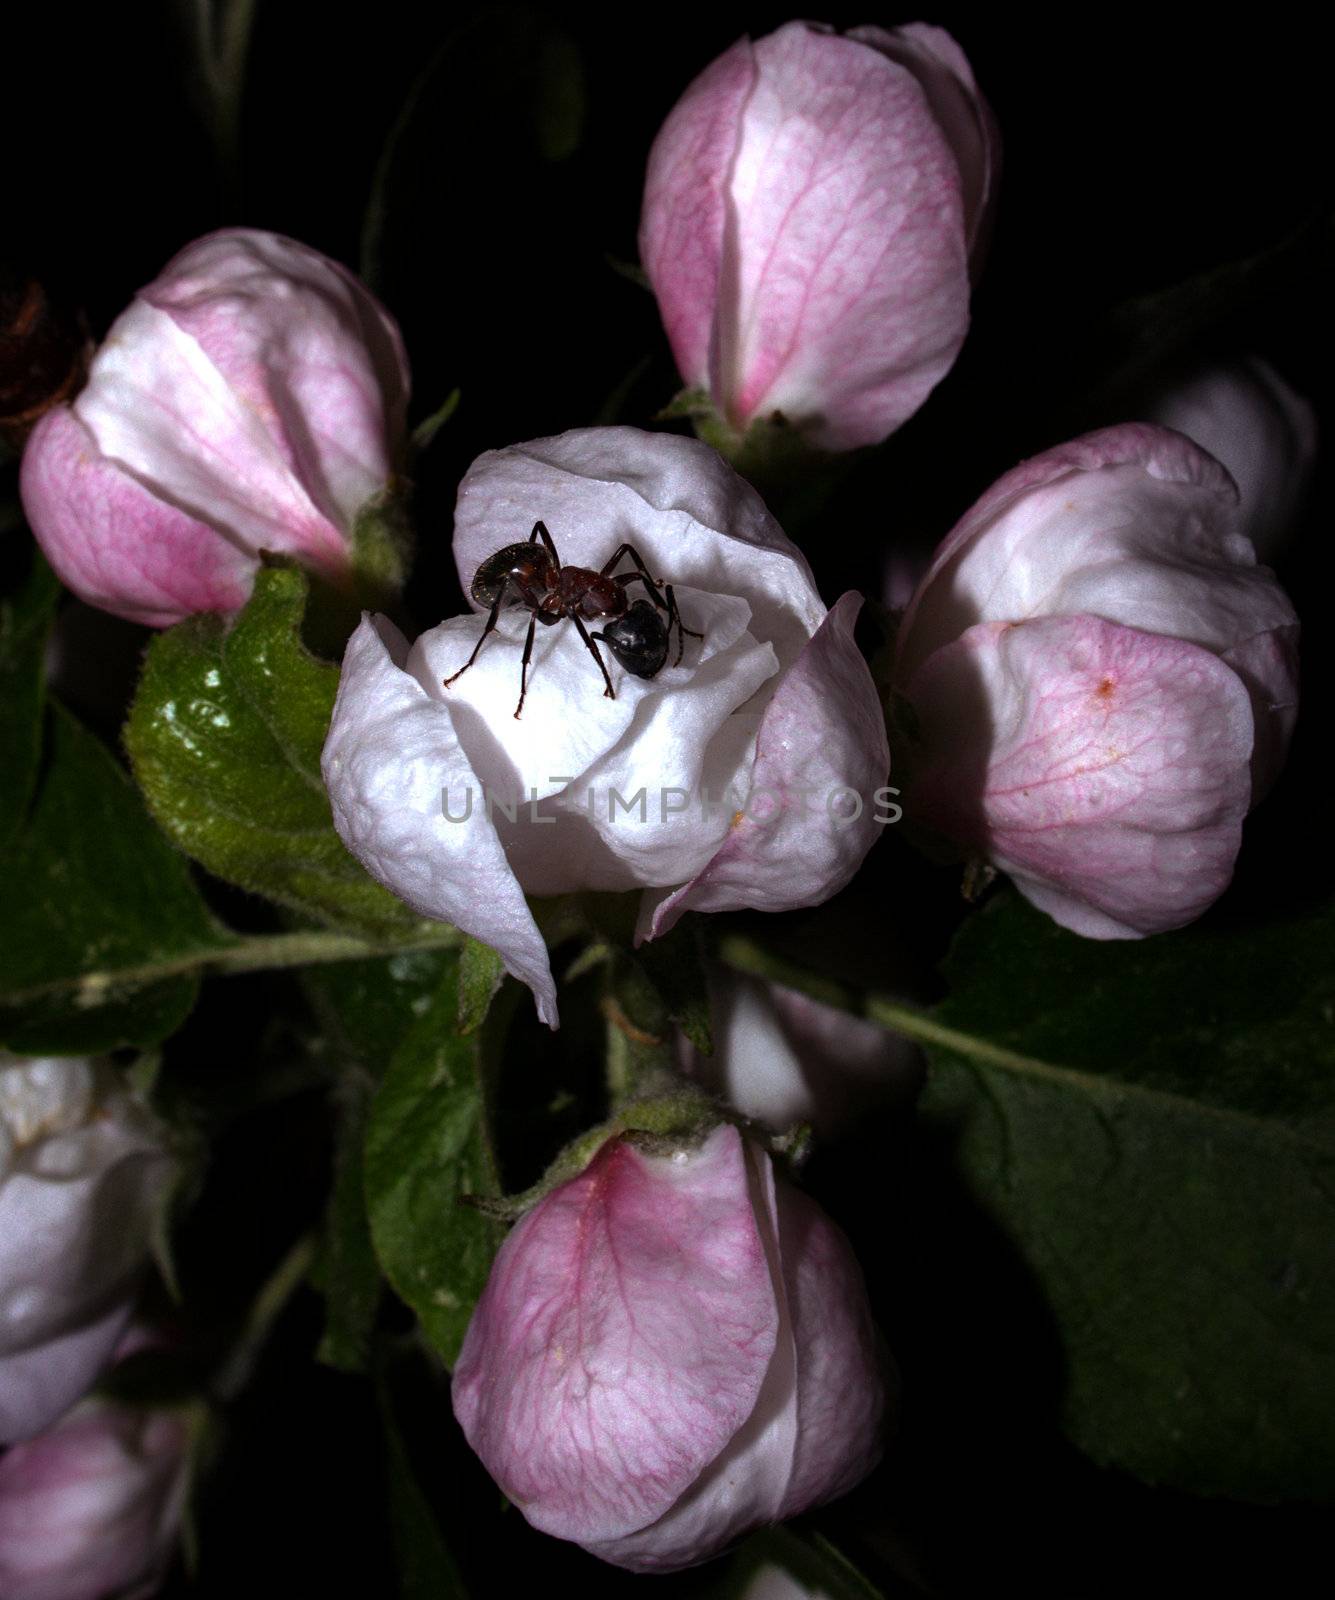 Ant crawling on apple tree flowers